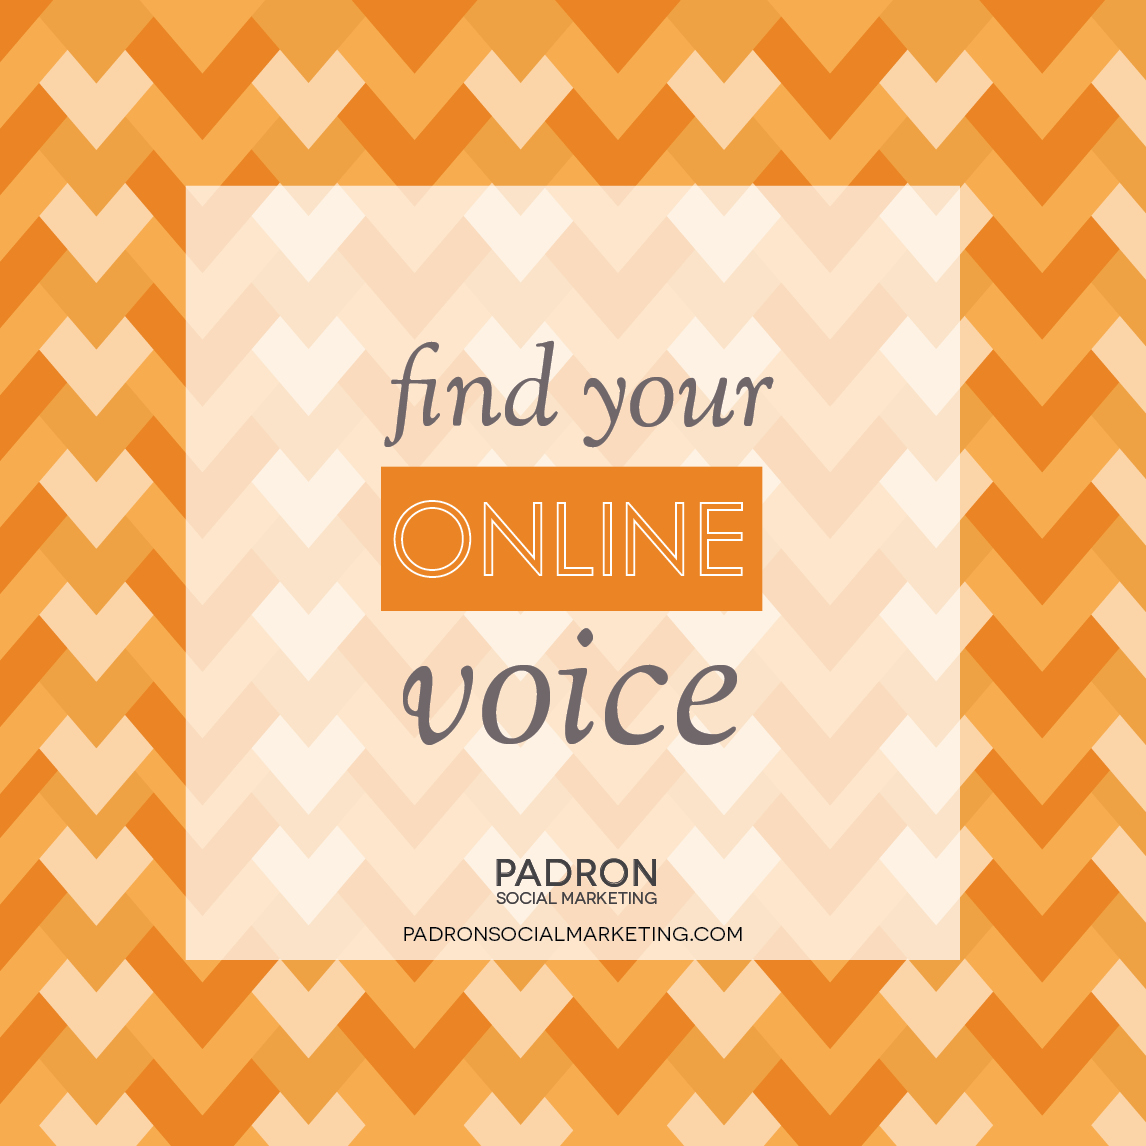 Finding Your Online Voice